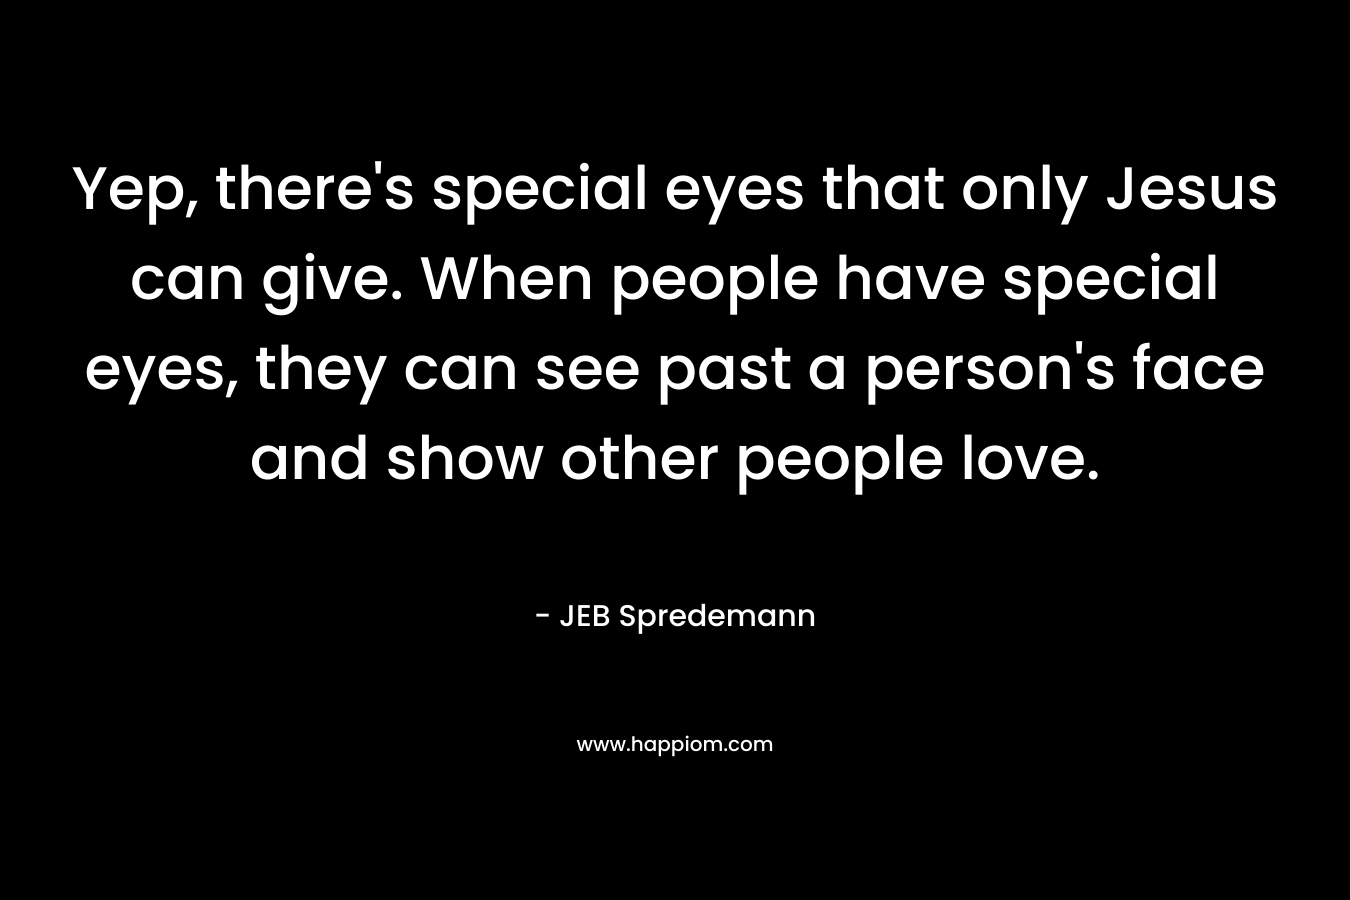 Yep, there’s special eyes that only Jesus can give. When people have special eyes, they can see past a person’s face and show other people love. – JEB Spredemann